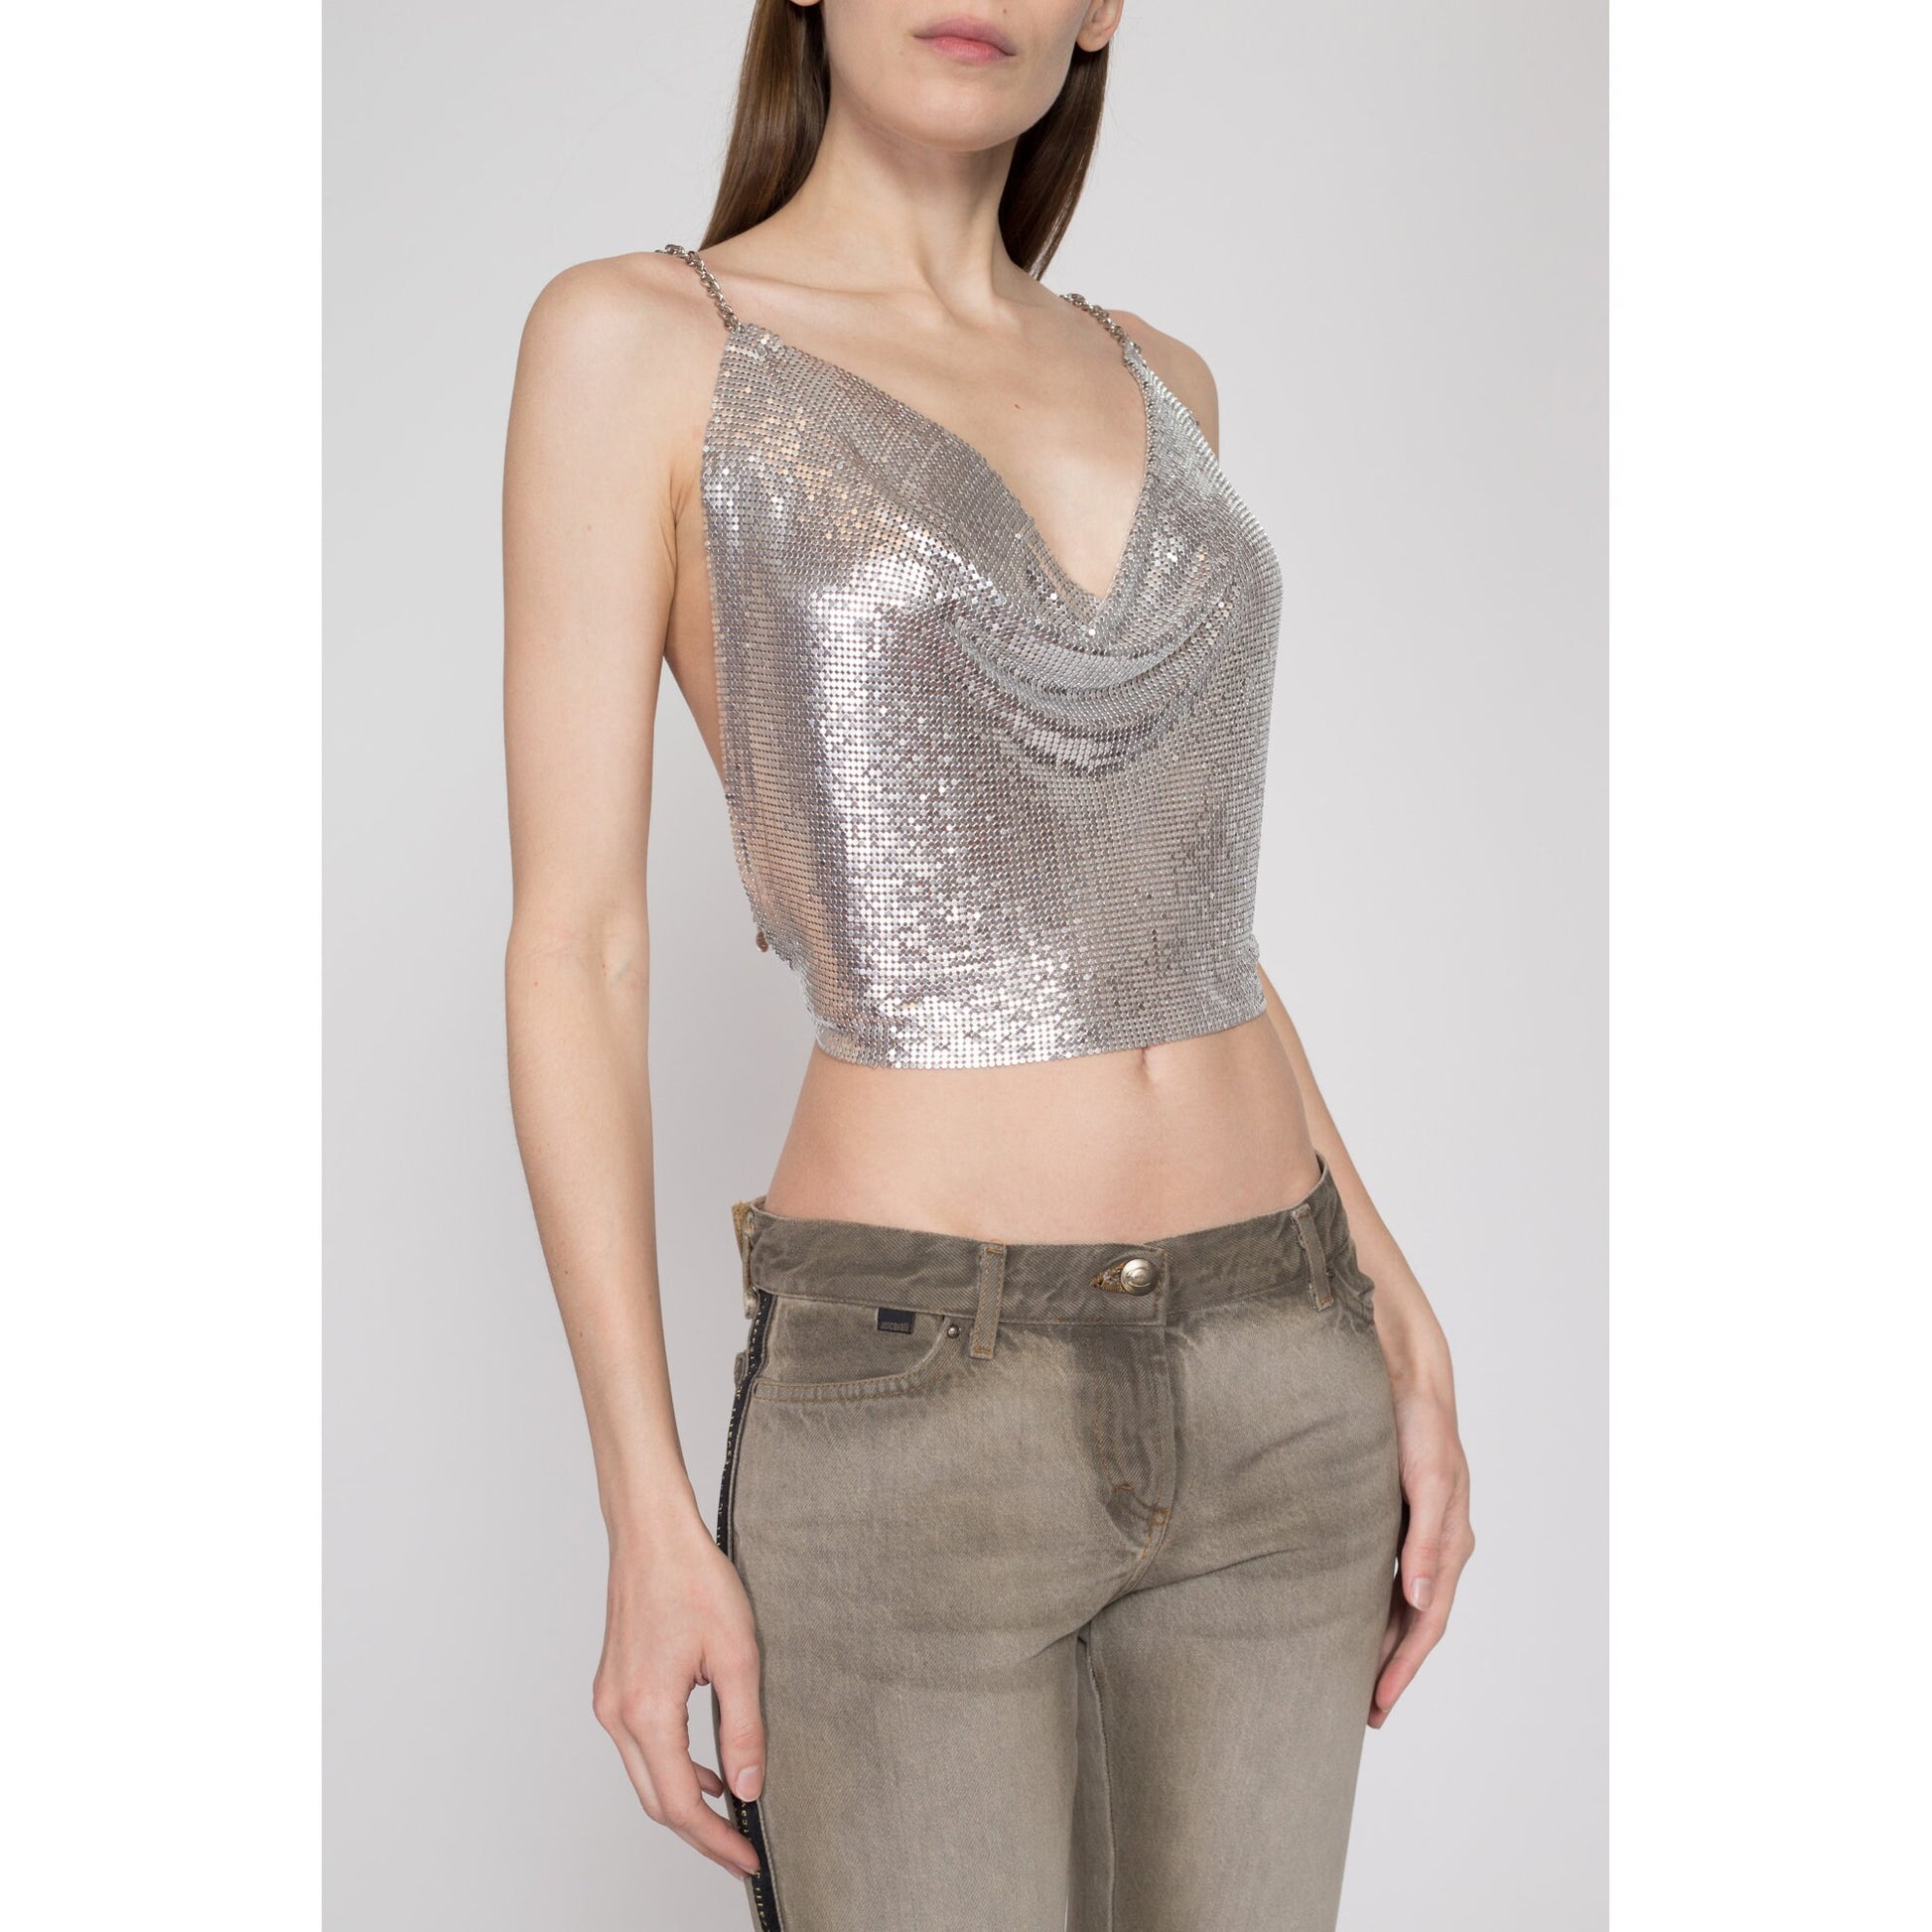 XS-Med 90s Silver Chainmail Backless Crop Top